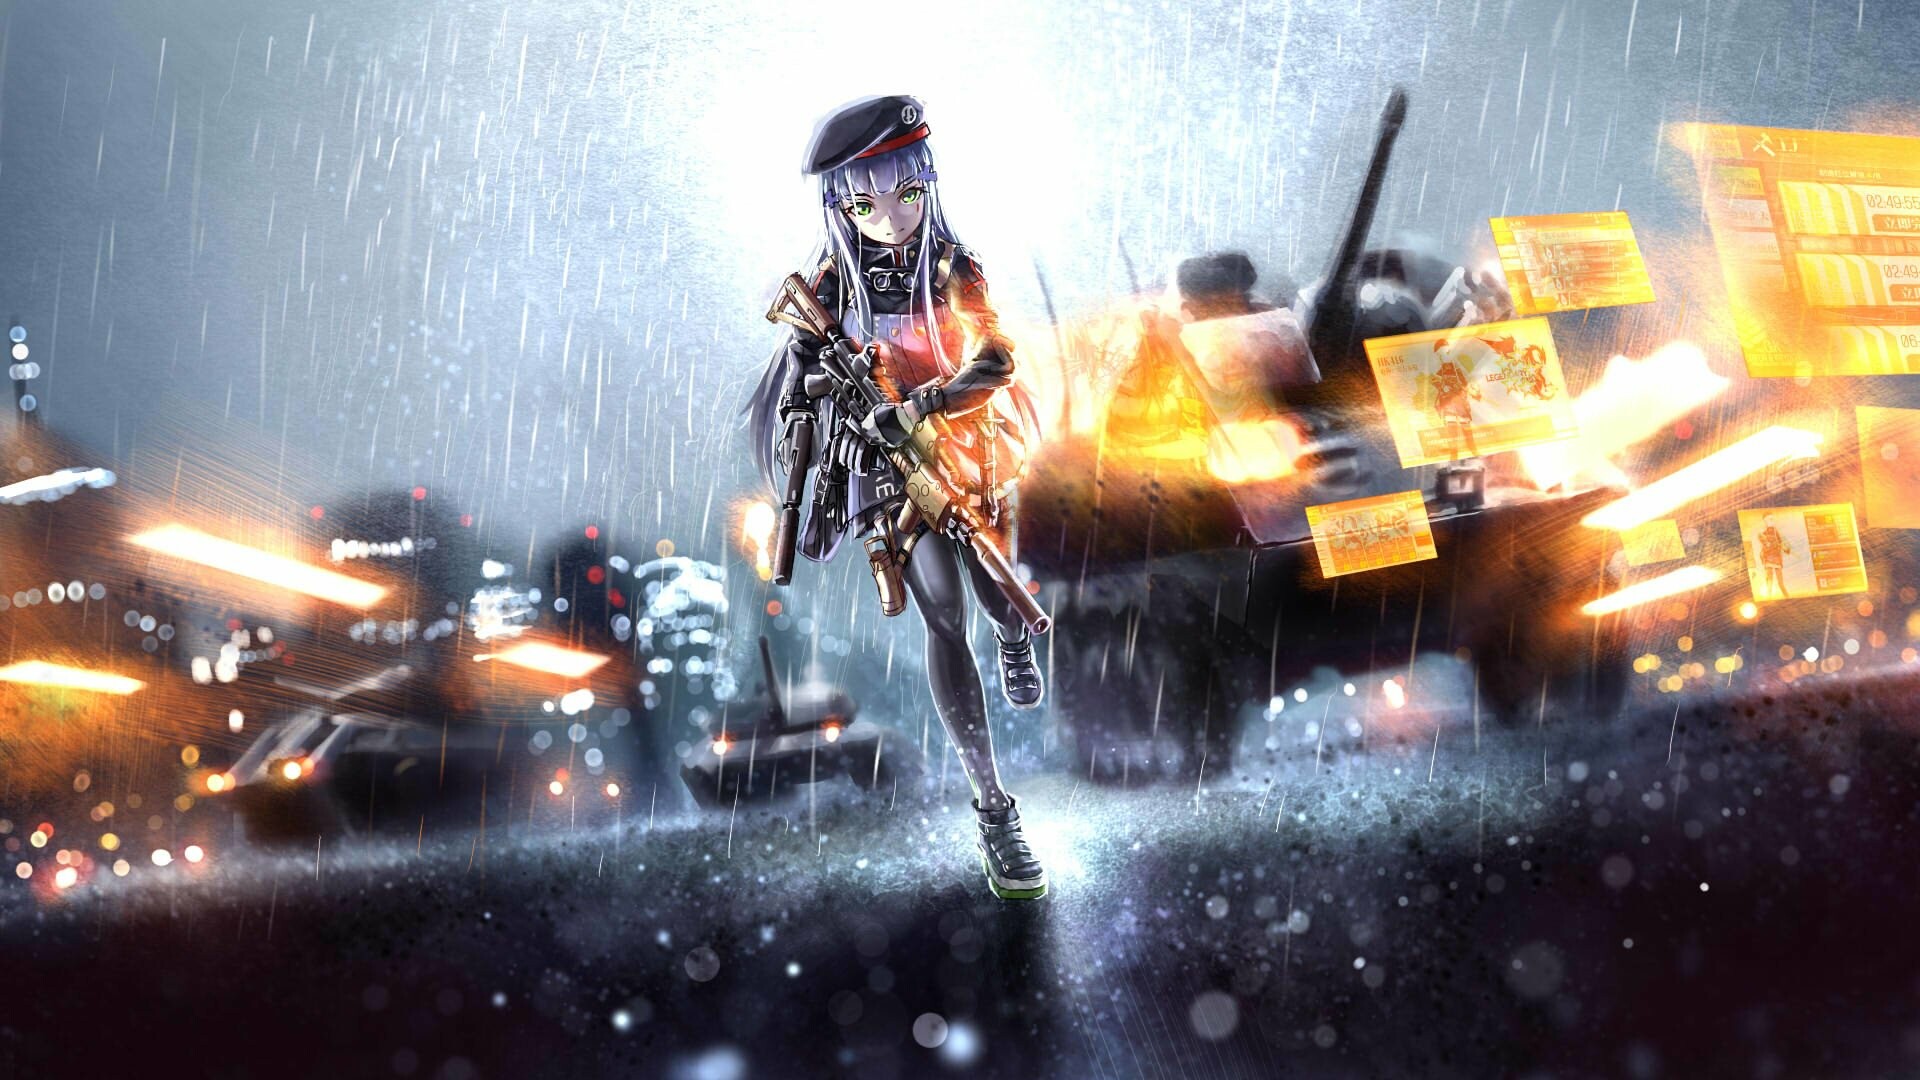 Battlefield 3: Game series, Focus on large-scale, online multiplayer battles. 1920x1080 Full HD Background.